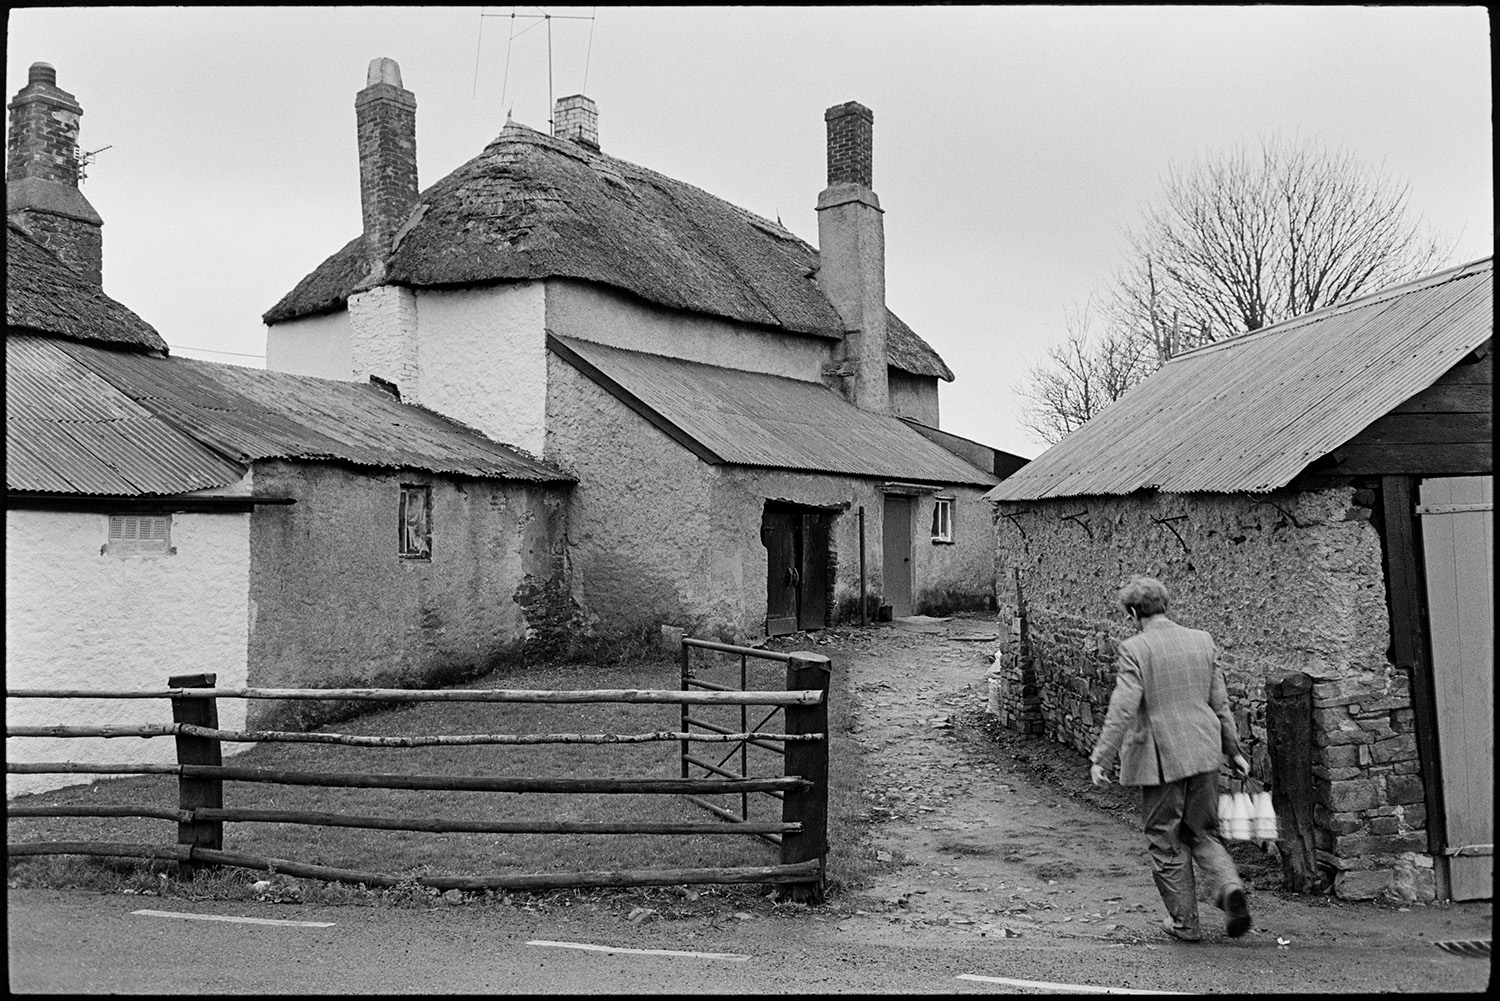 Farmer, milkman doing last milk round, showing new man the ropes, milk bottles.
[Ivor Bourne of Jeffrys Farm delivering milk on his last milk round to Chaplands, Beaford. The cottage is thatched and has an extension with a corrugated iron roof.]